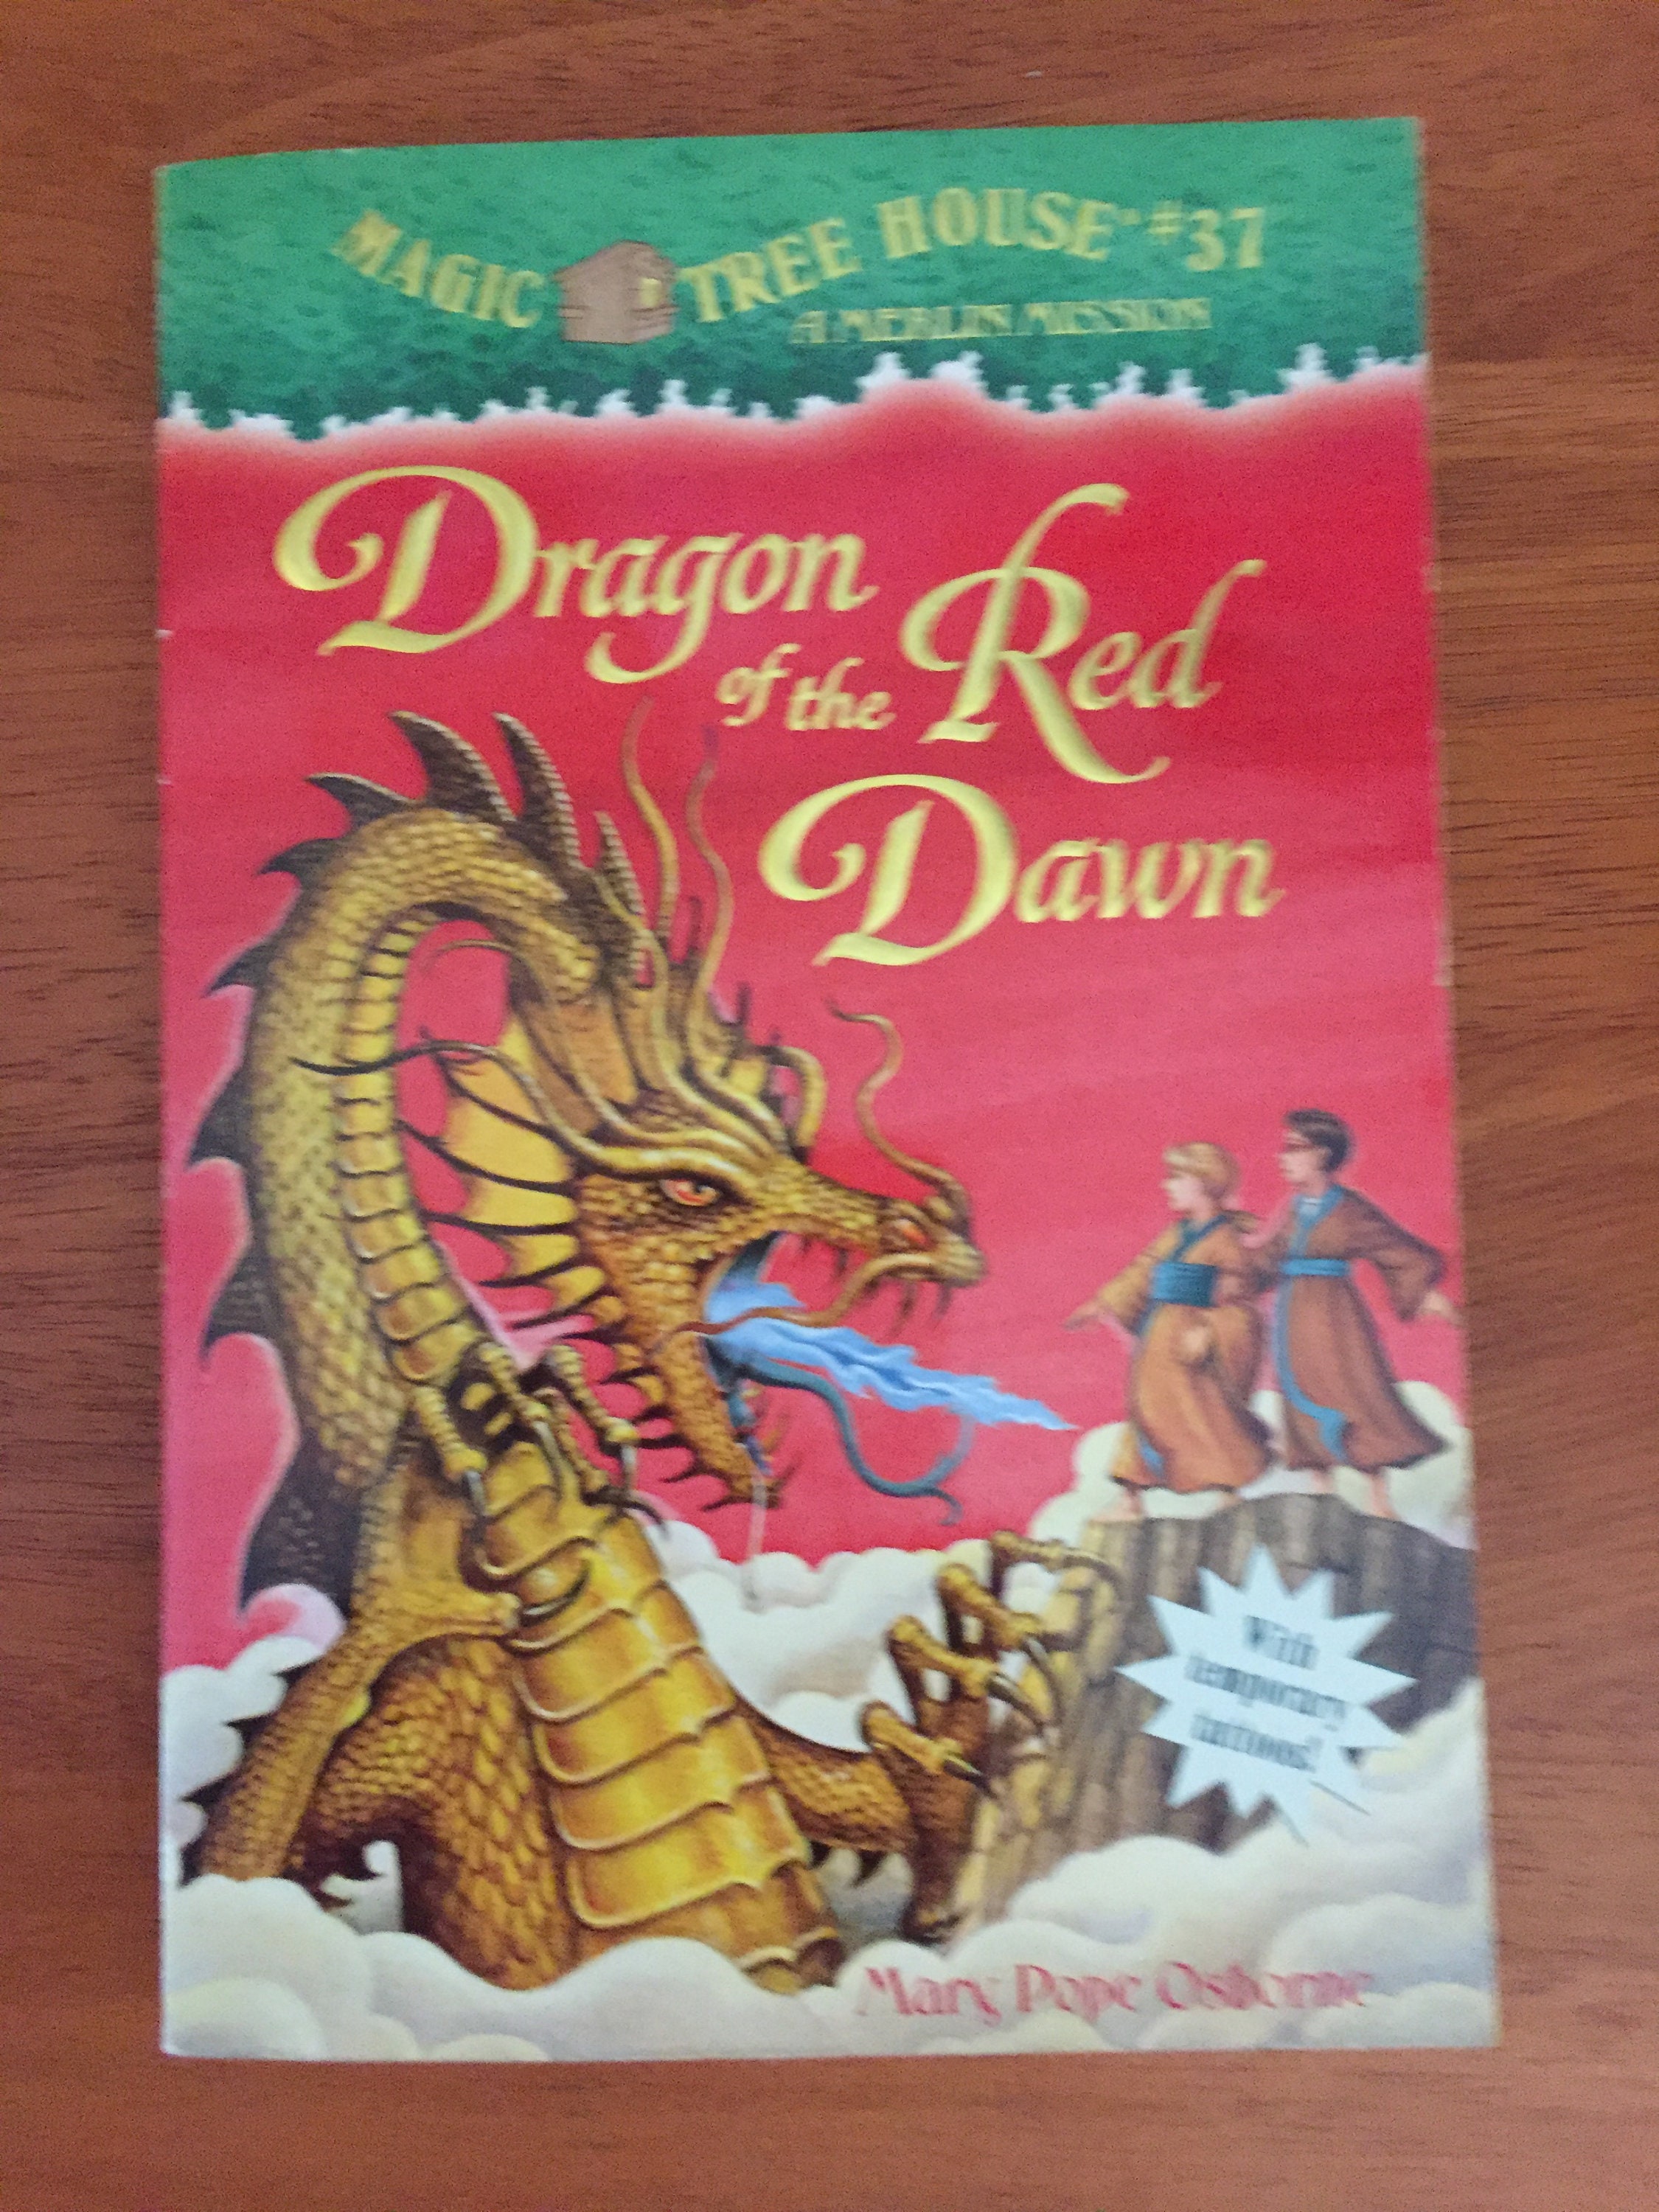 House 37 Dragon the Red Dawn - Etsy